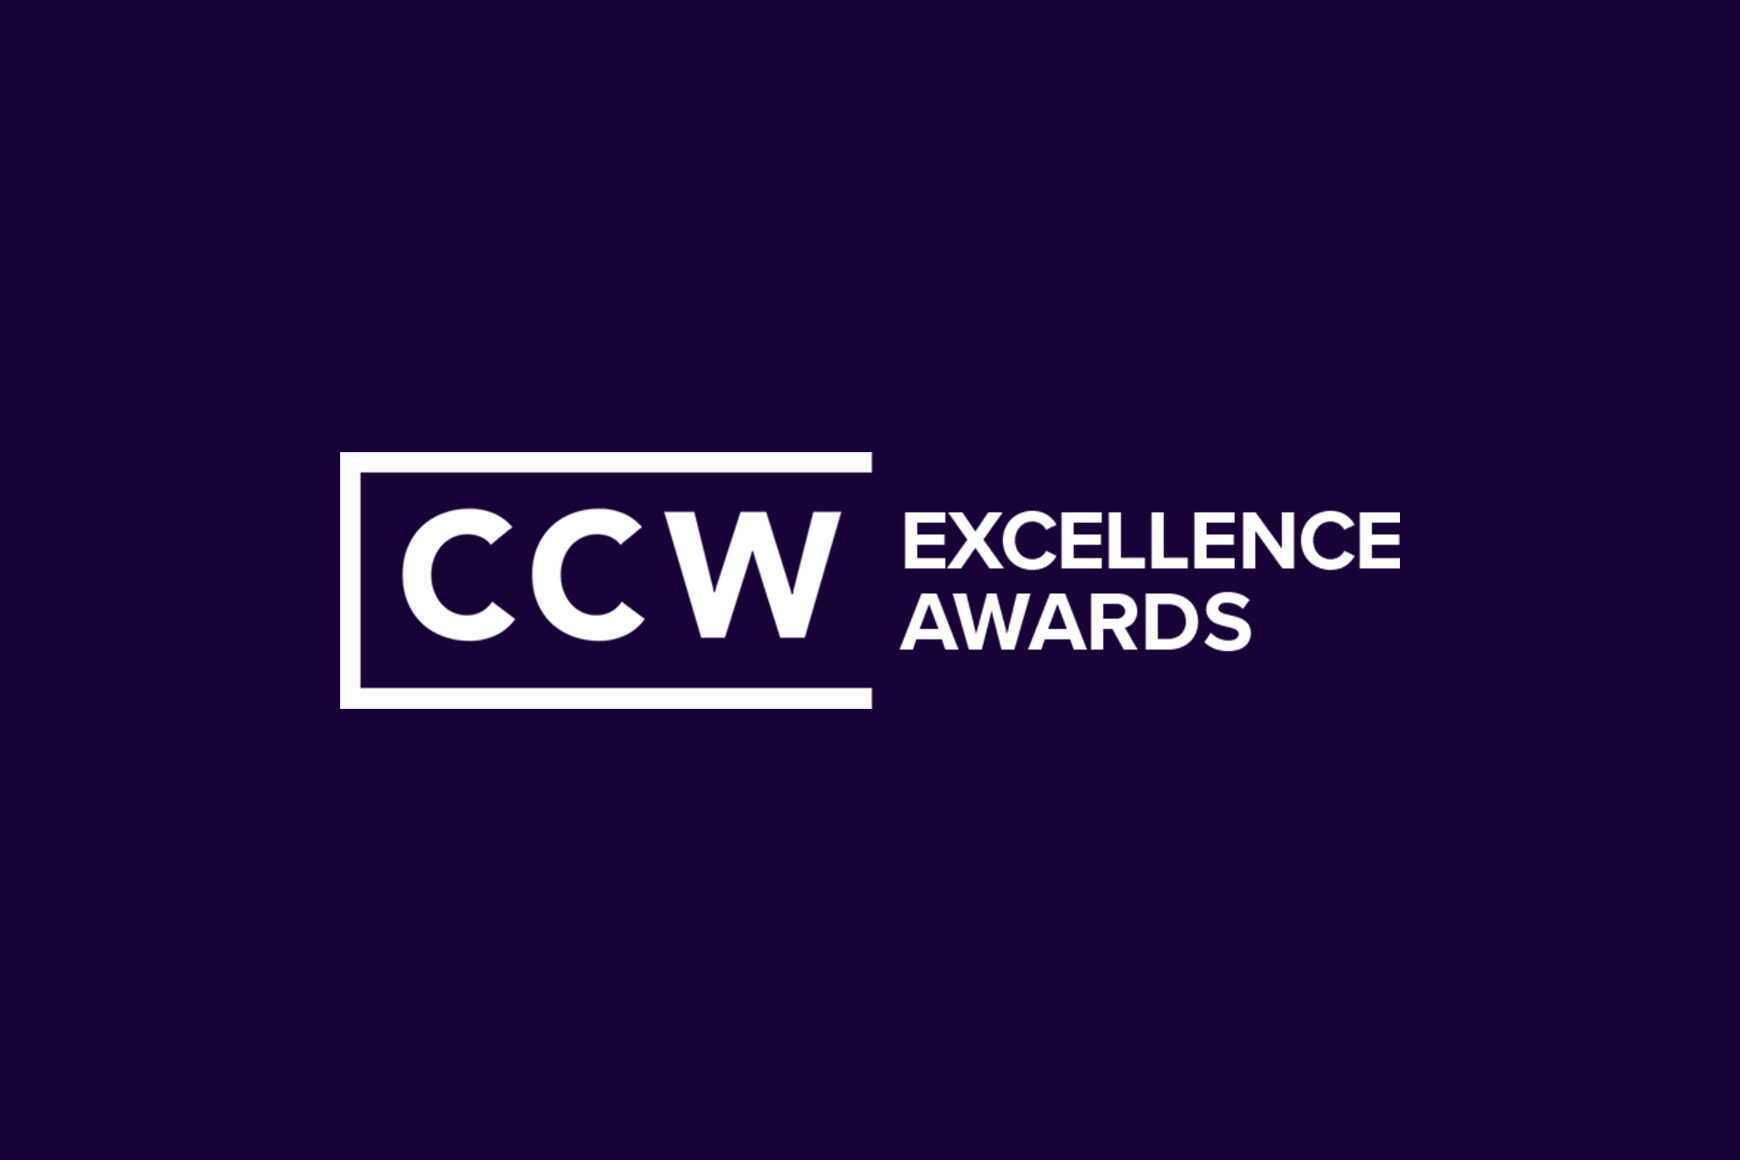 Talkdesk Wins Cloud-Based CX Solution of the Year at 2021 CCW Excellence Awards